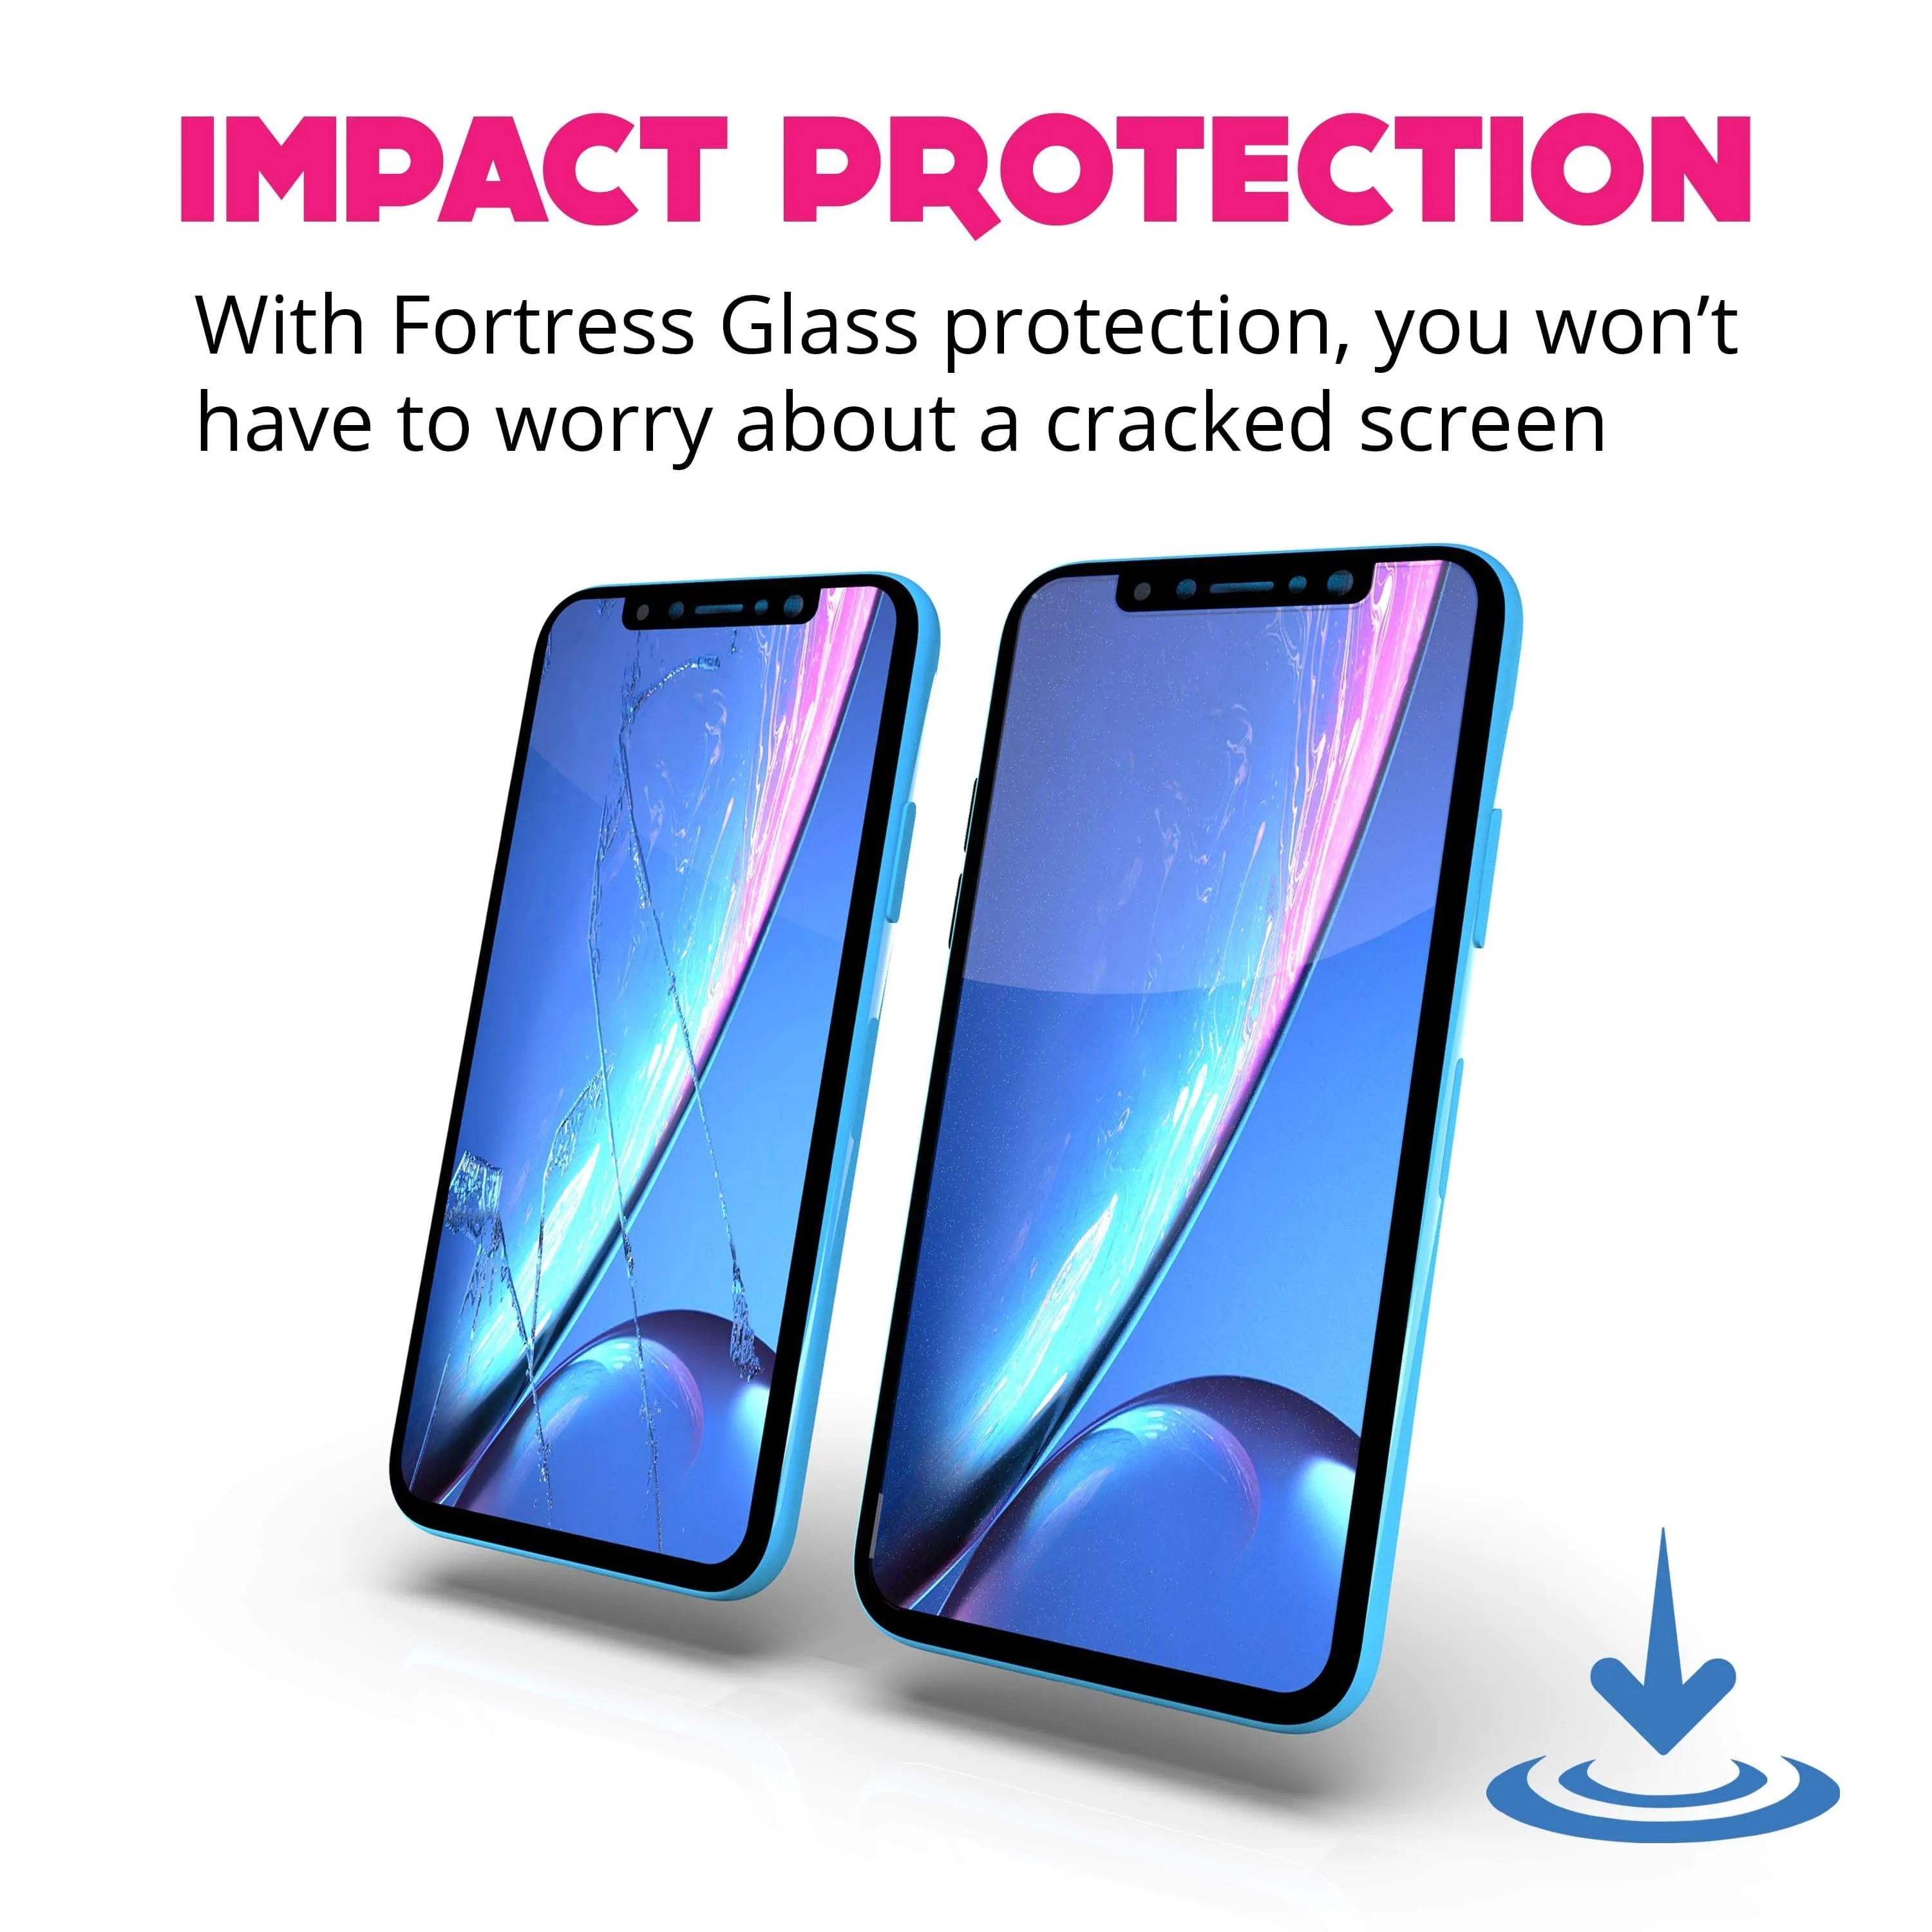 Fortress iPhone 11 Screen Protector - $200 Device Coverage  Scooch Screen Protector